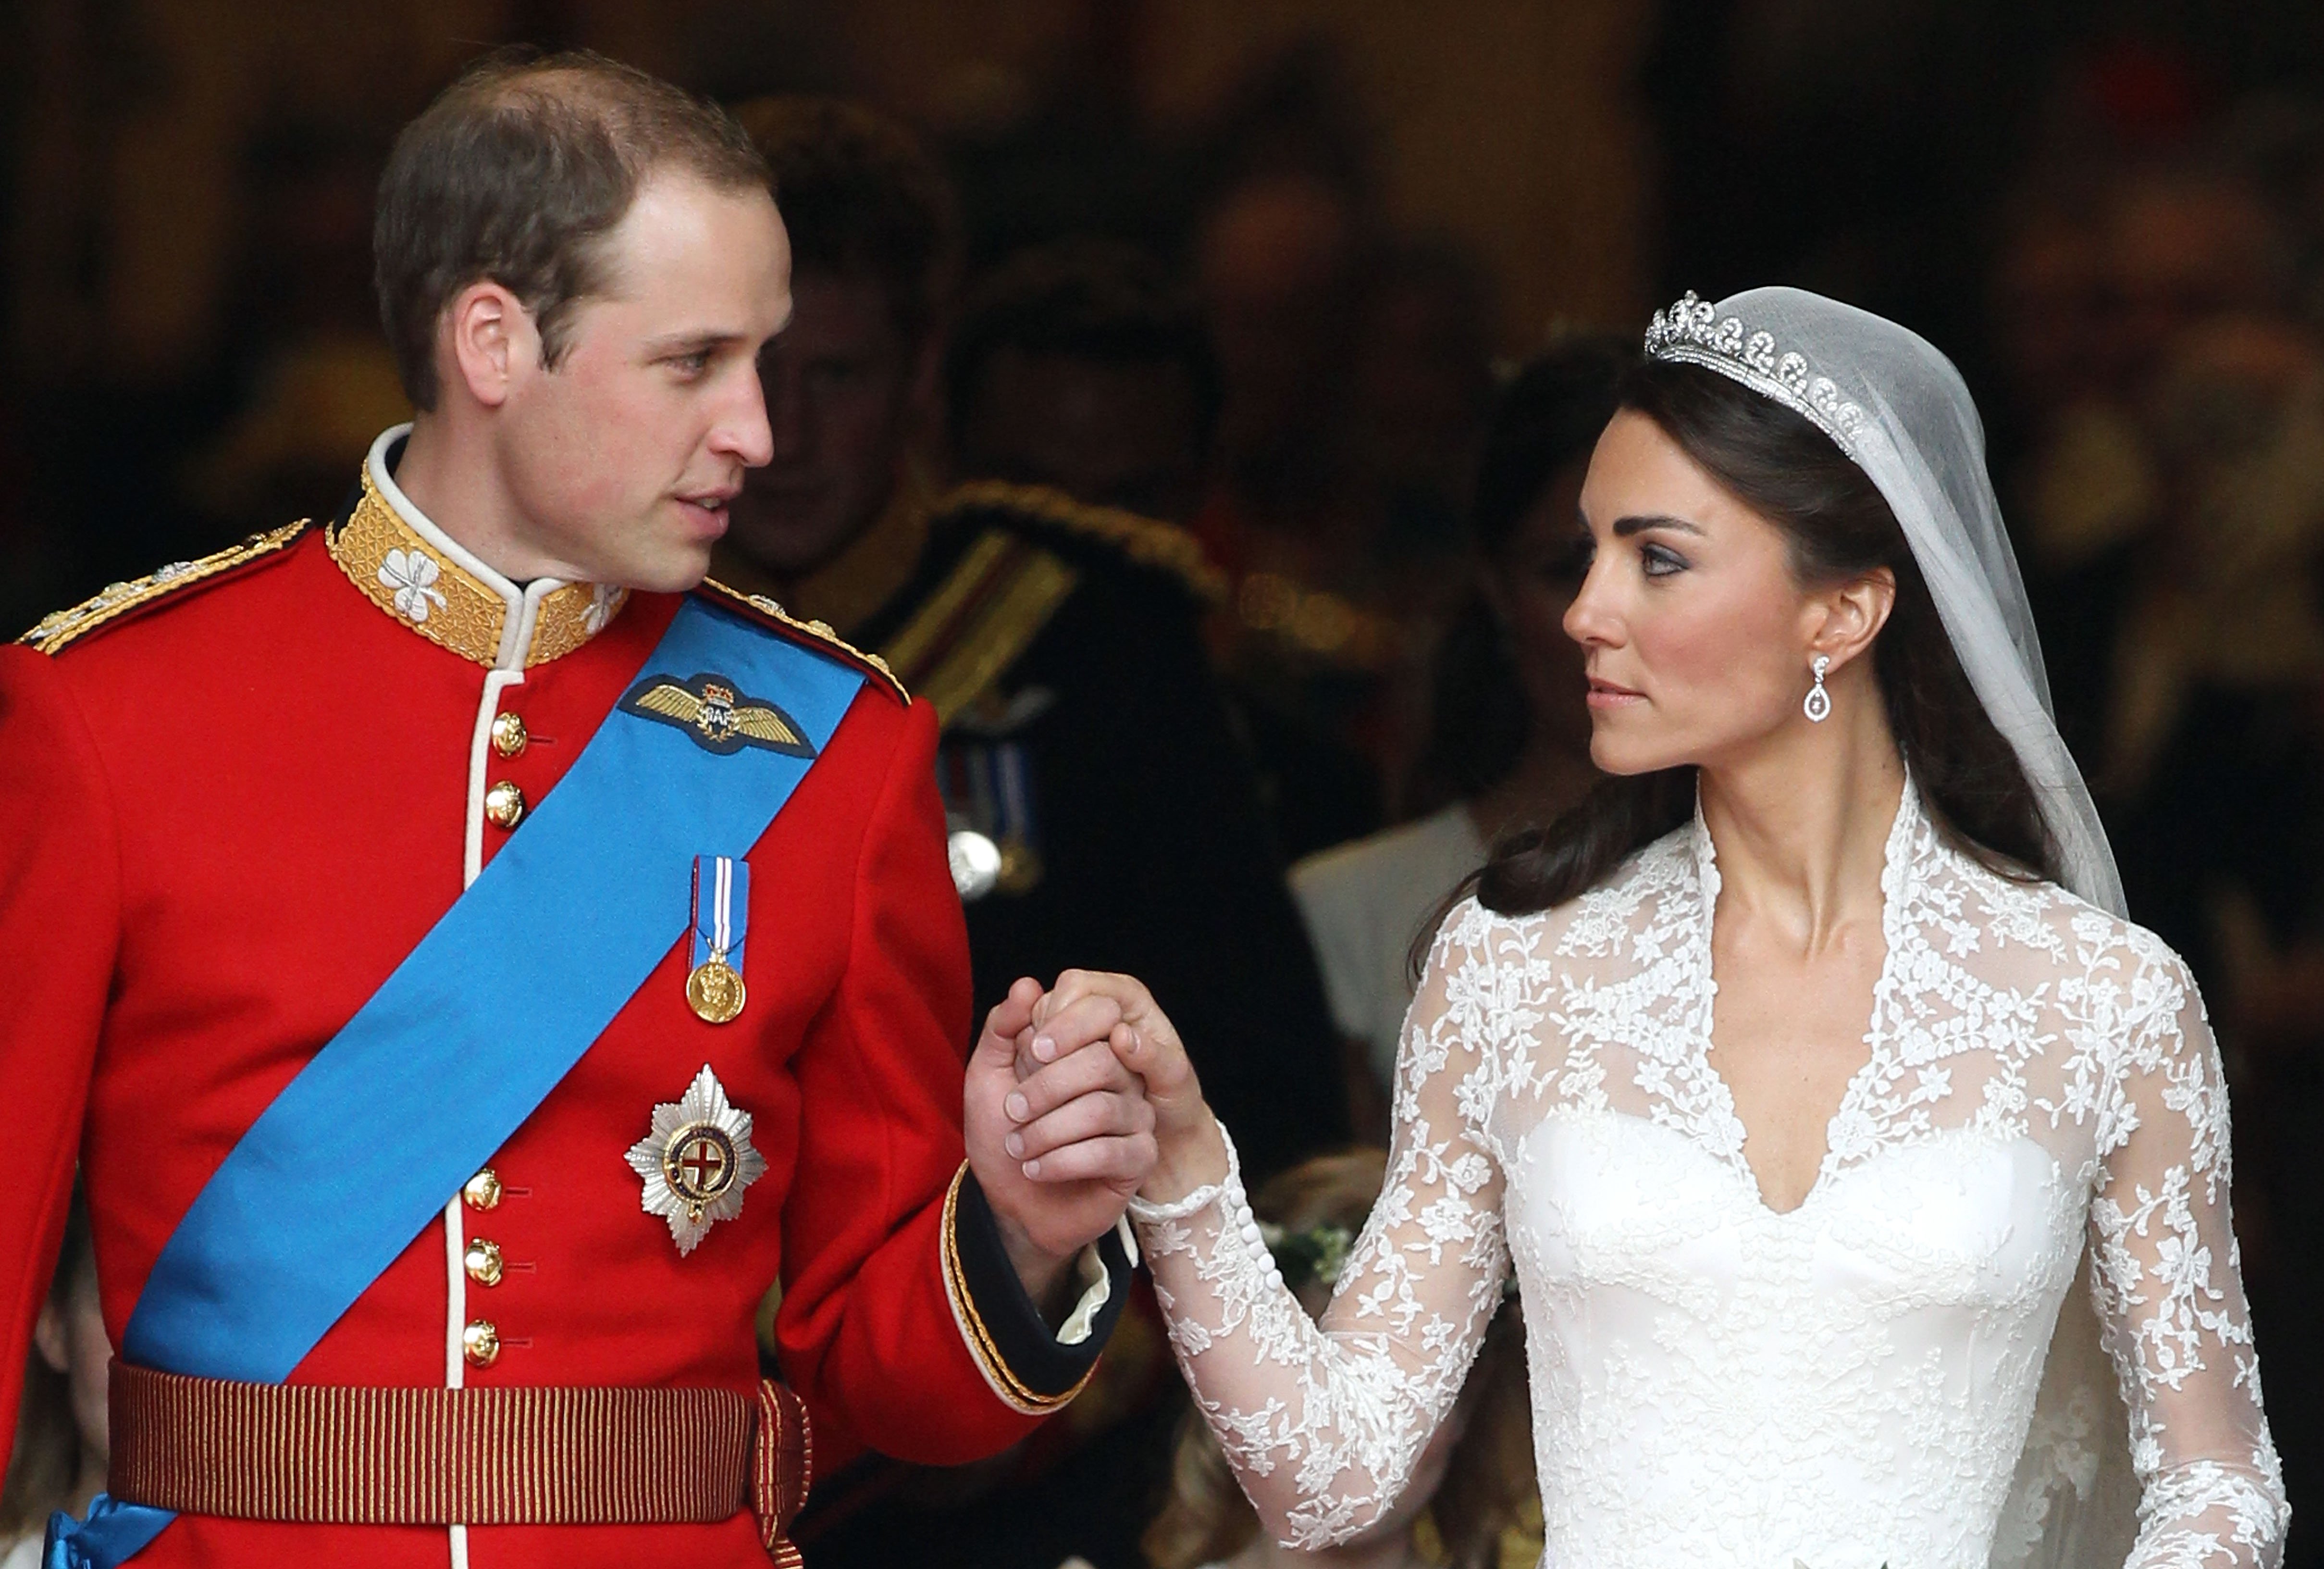 Prince William and Kate Middleton on their wedding in London 2012. | Source: Getty Images